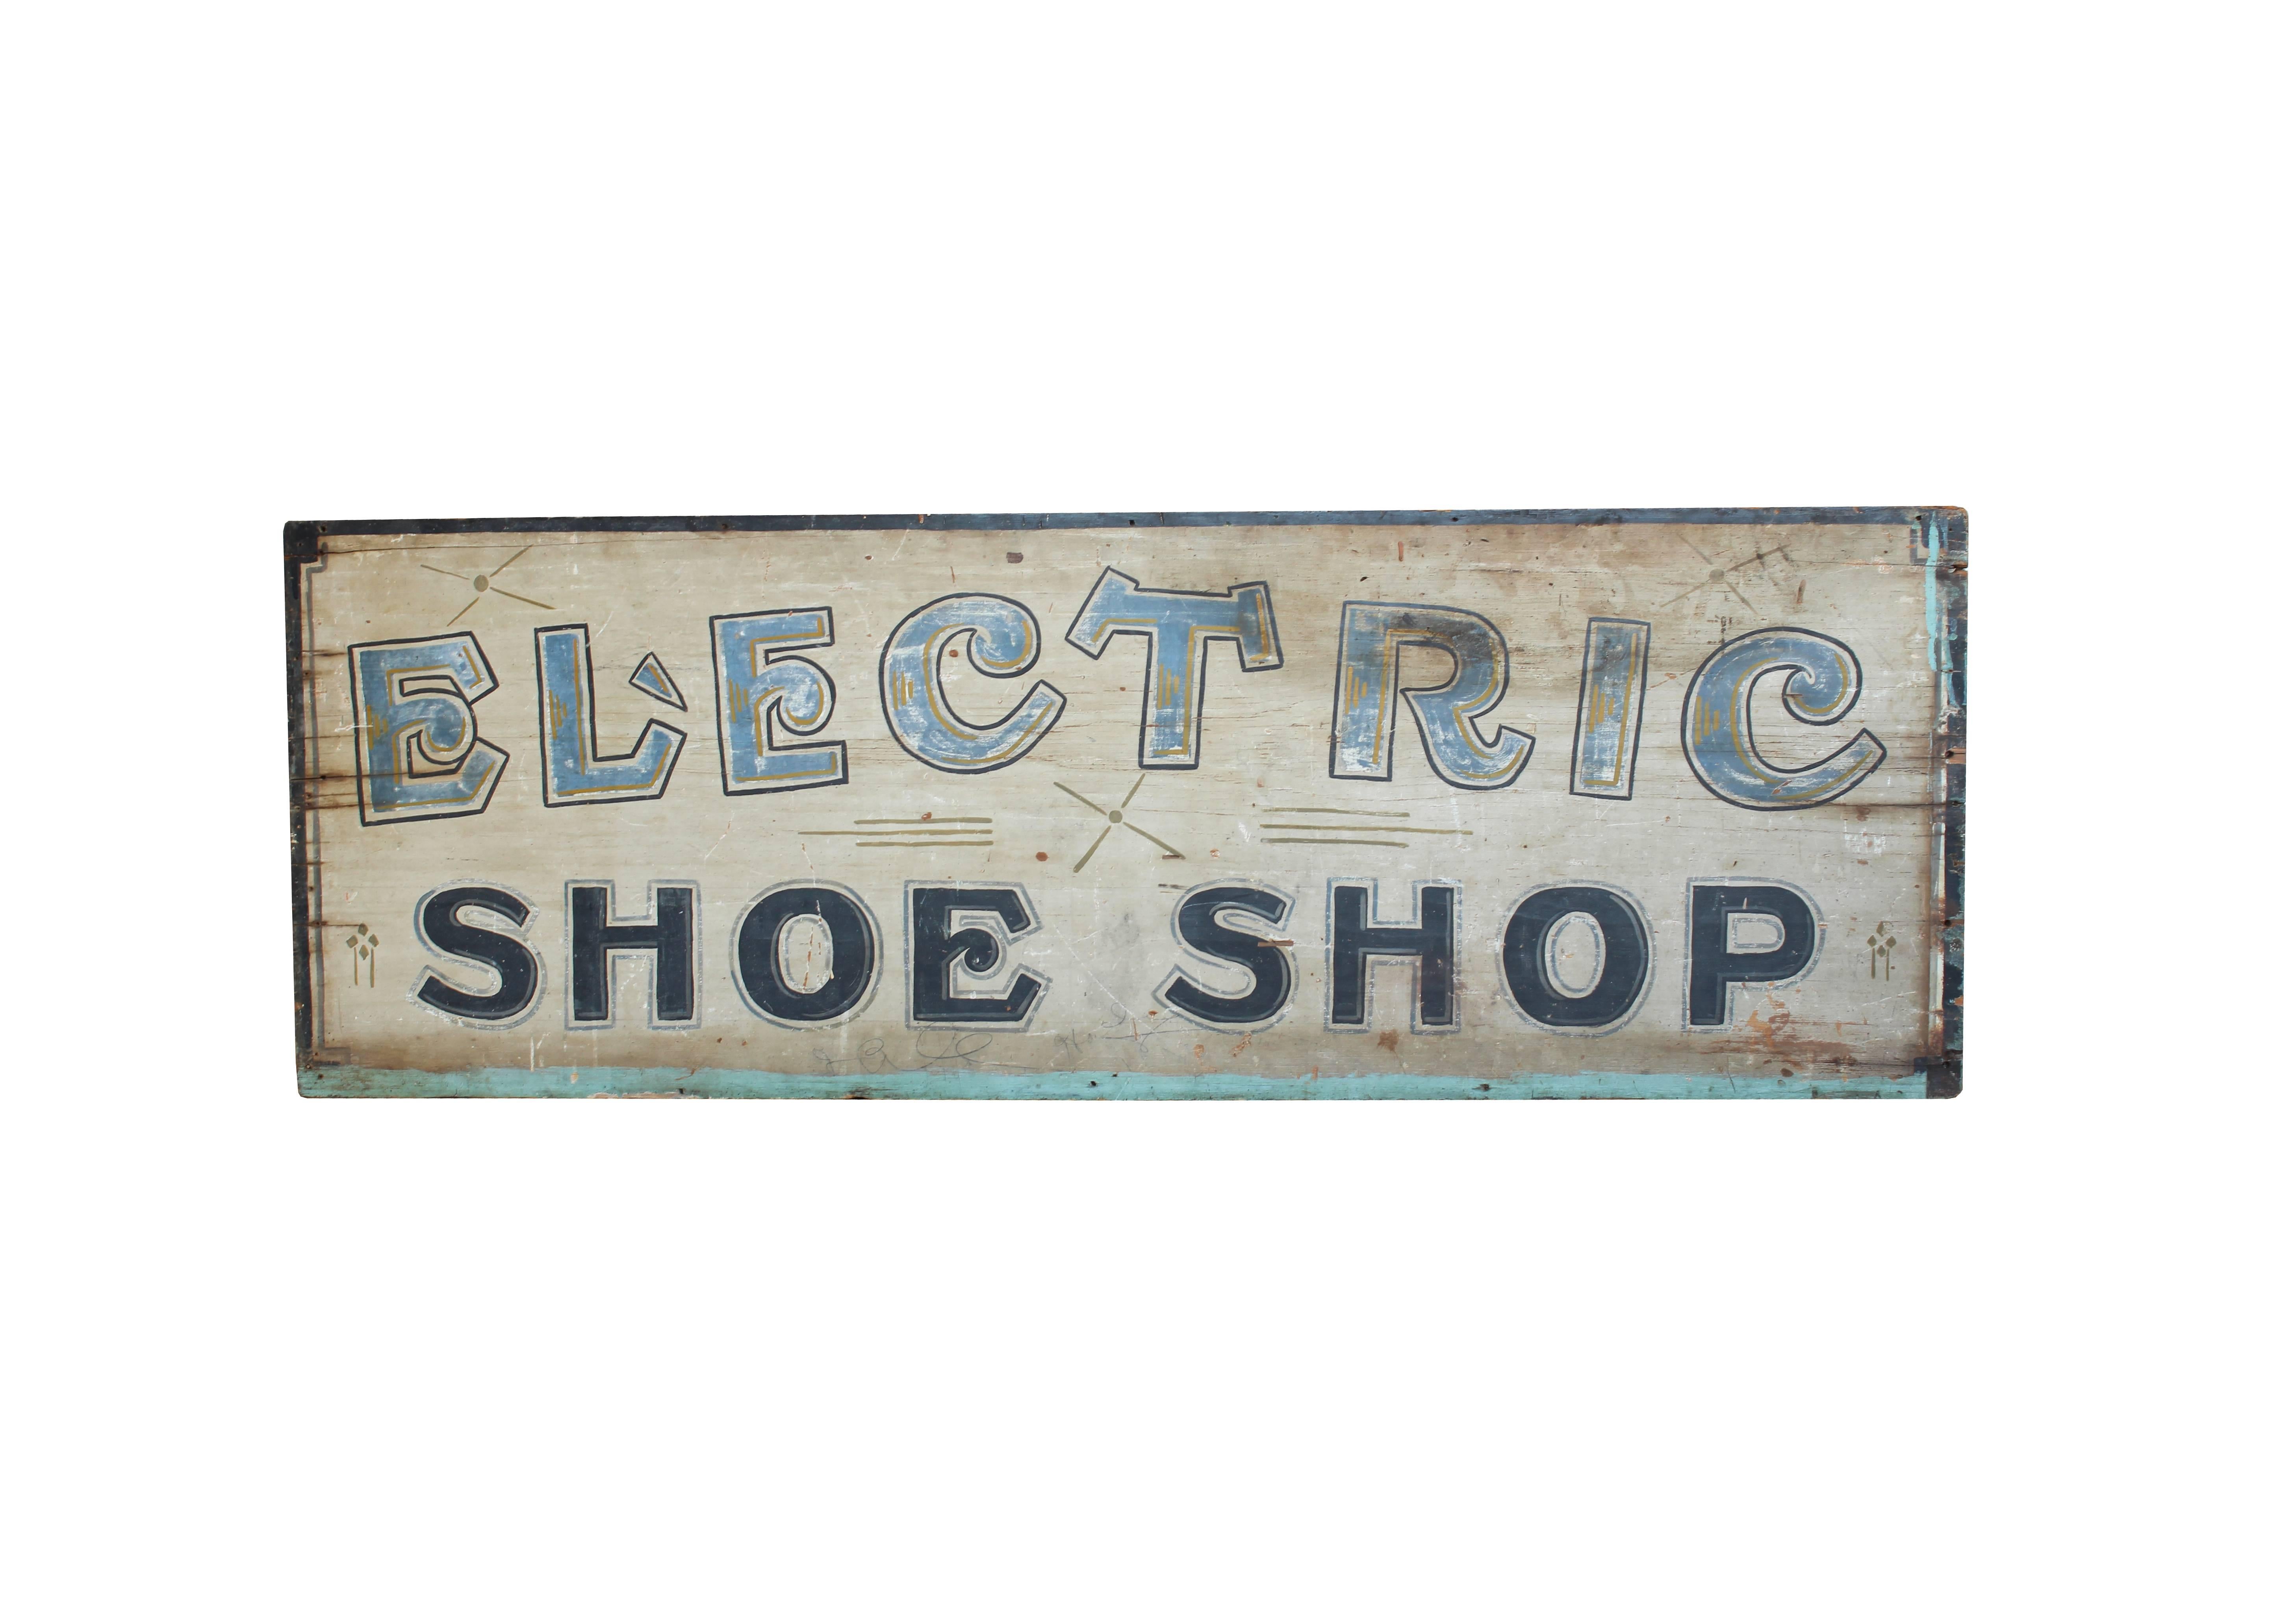 This very early 20th century wood sign is hand-painted and double sided. With a bold font in keeping with Classic turn-of-the-century styles, the pale blue, navy, green, and gold colors are still vibrant. The slight variations in the green accents